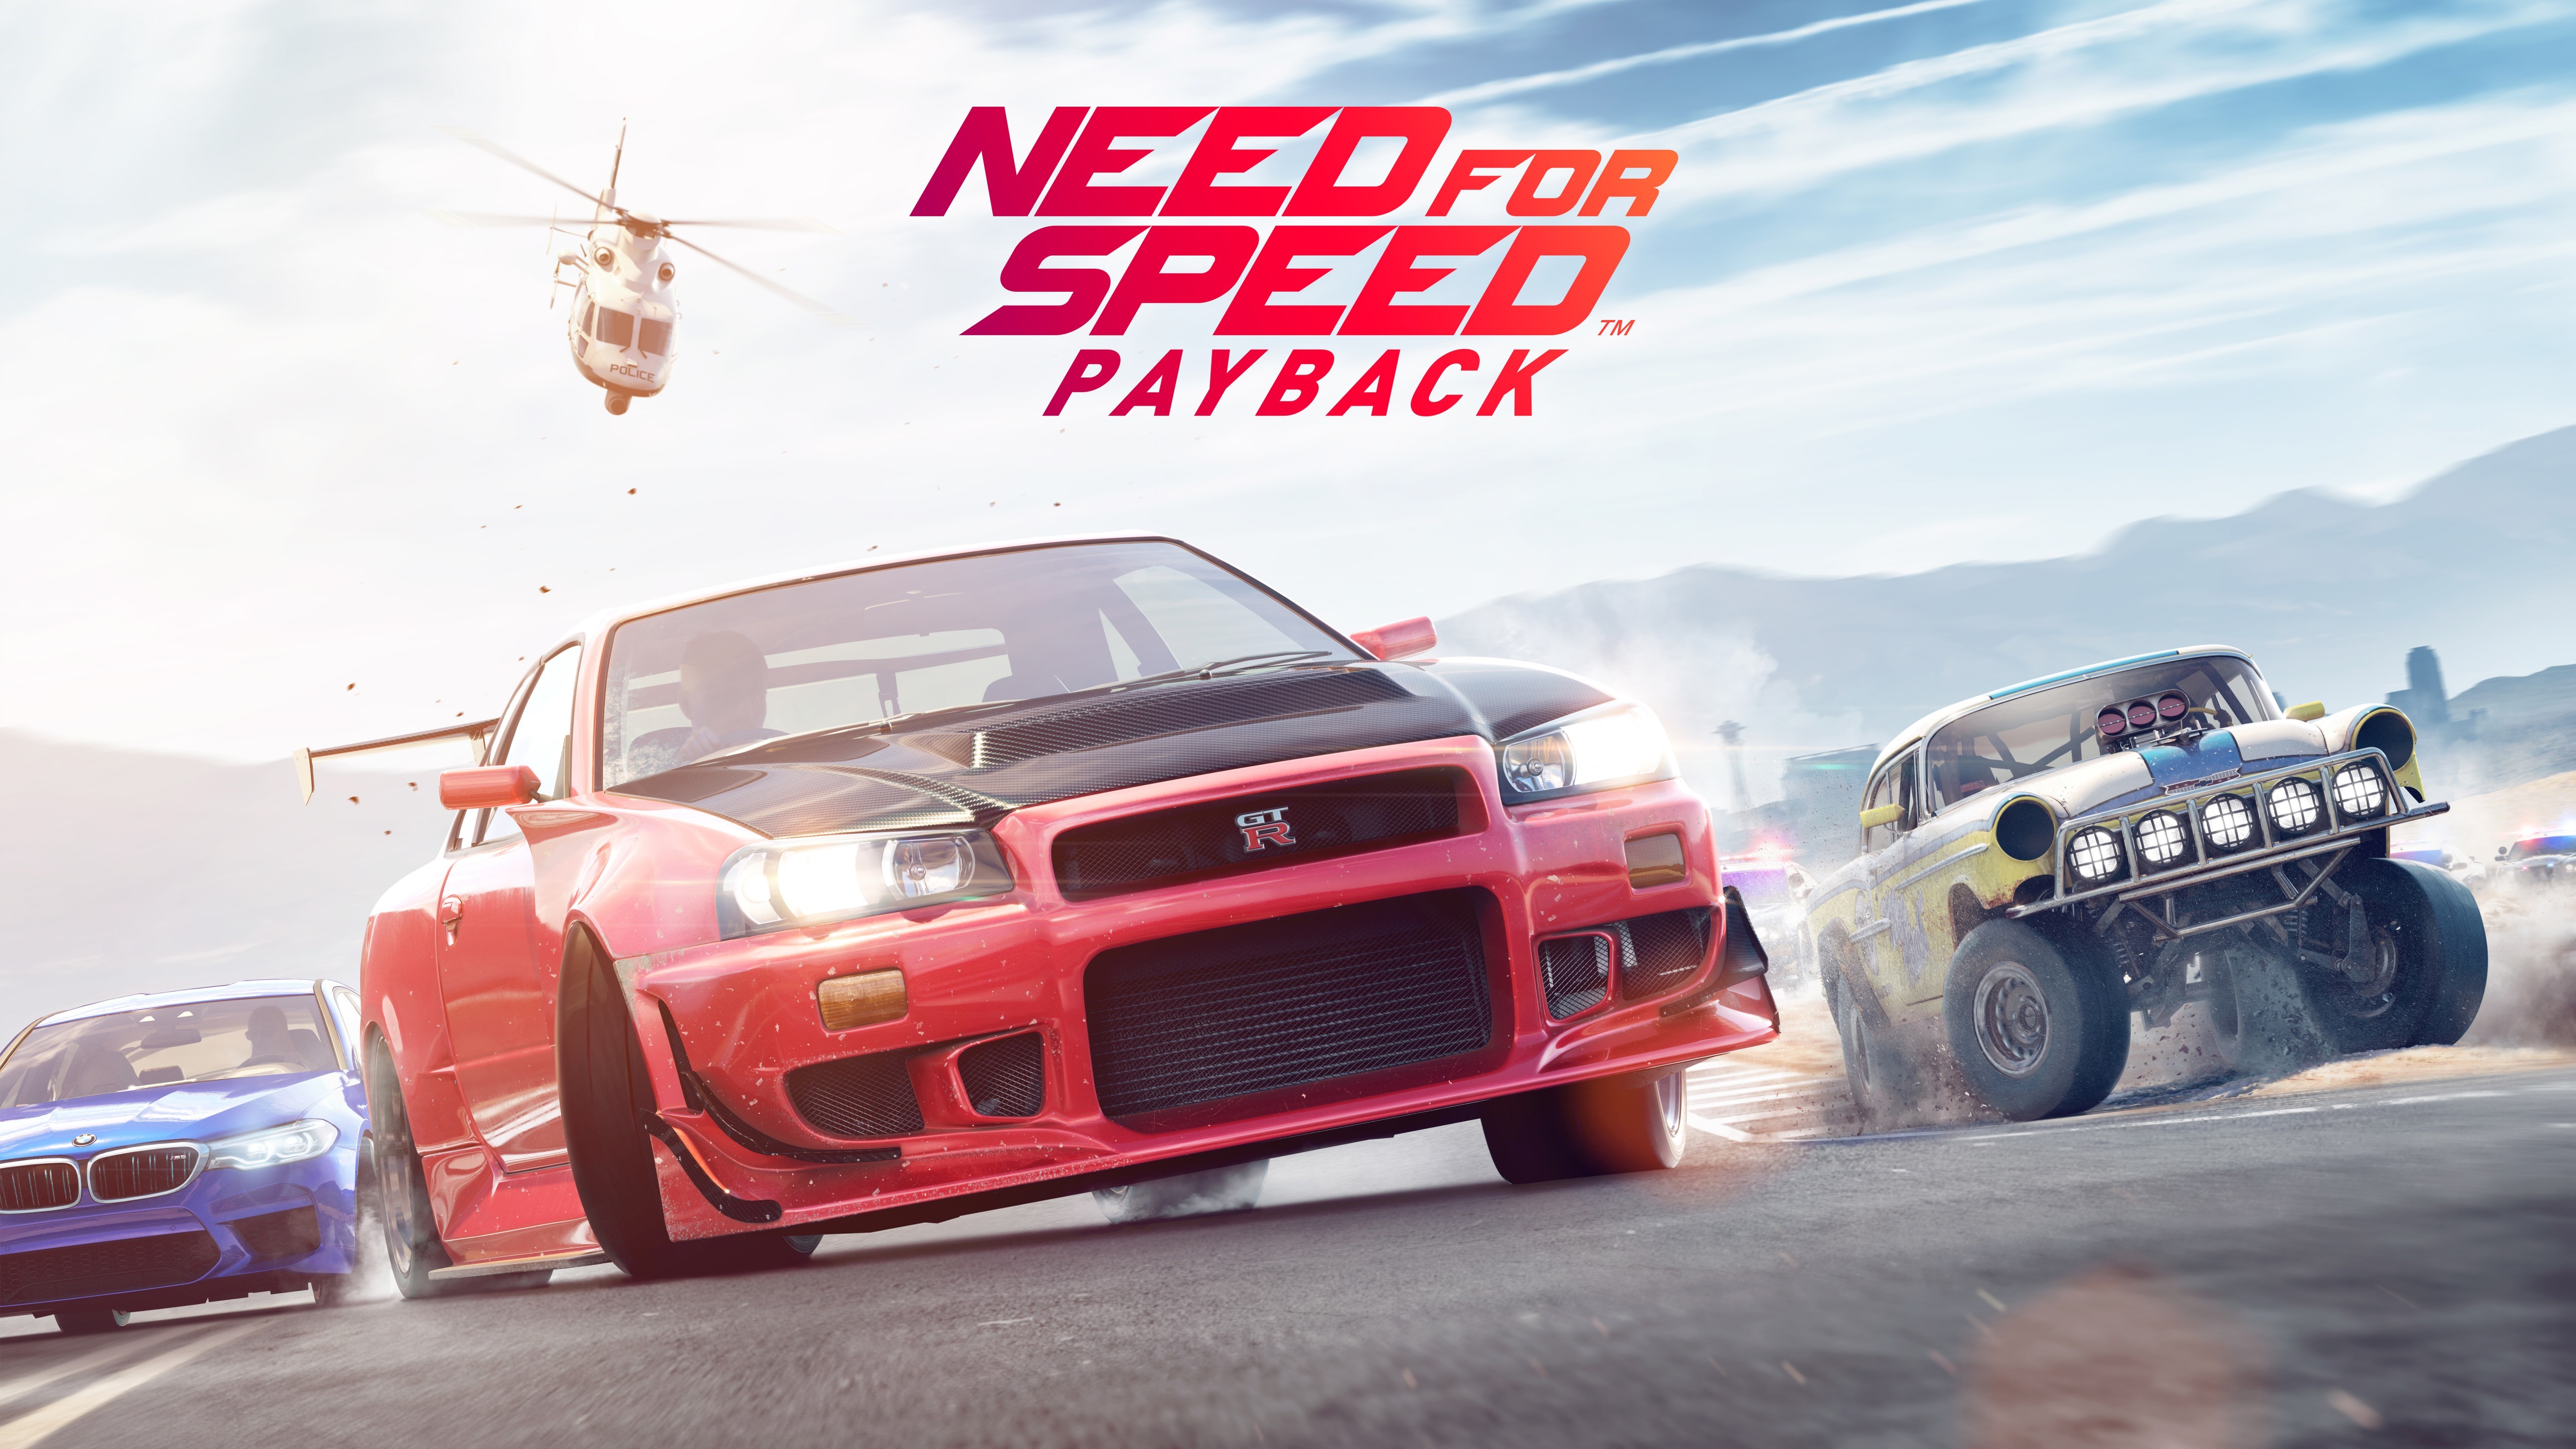 need_for_speed_payback_4k_8k-5120x2880.jpg